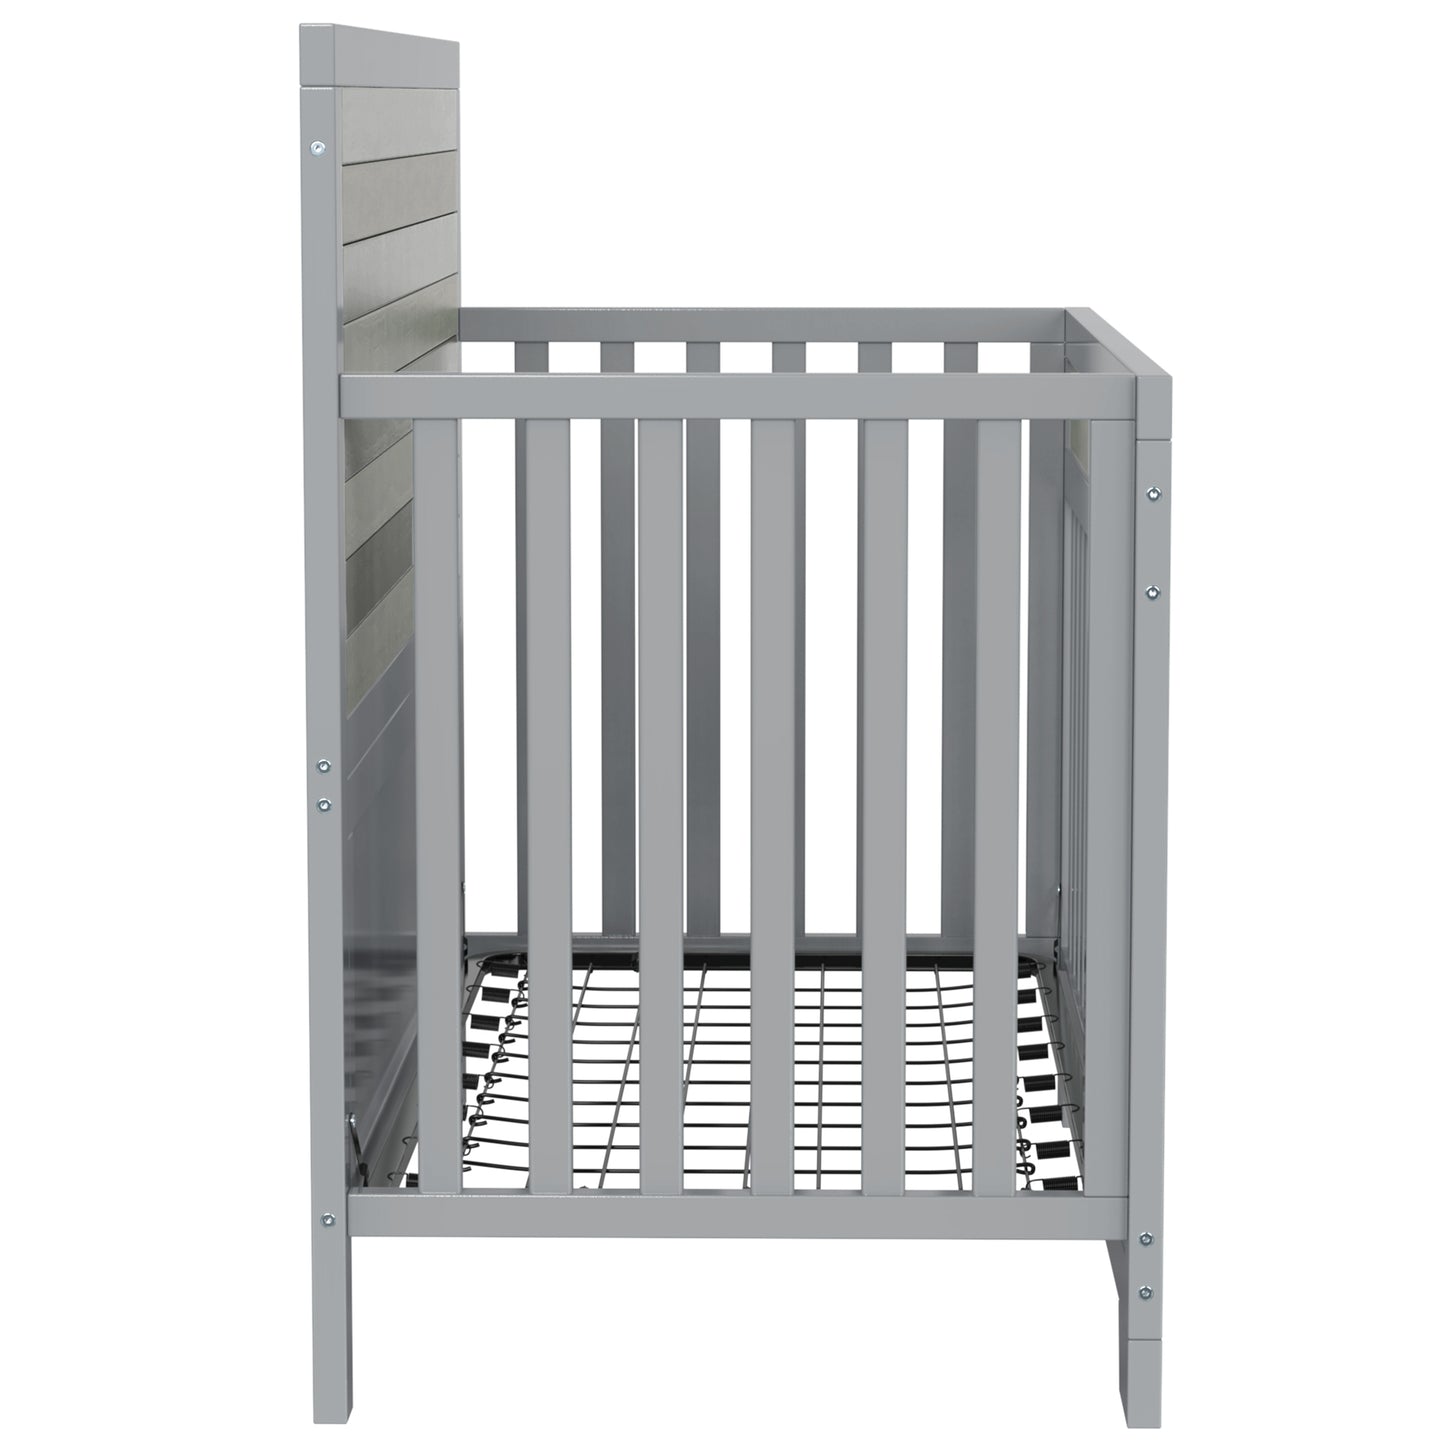 Semiocthome Certified Baby Safe Crib, Pine Solid Wood, Non-Toxic Finish, Gray